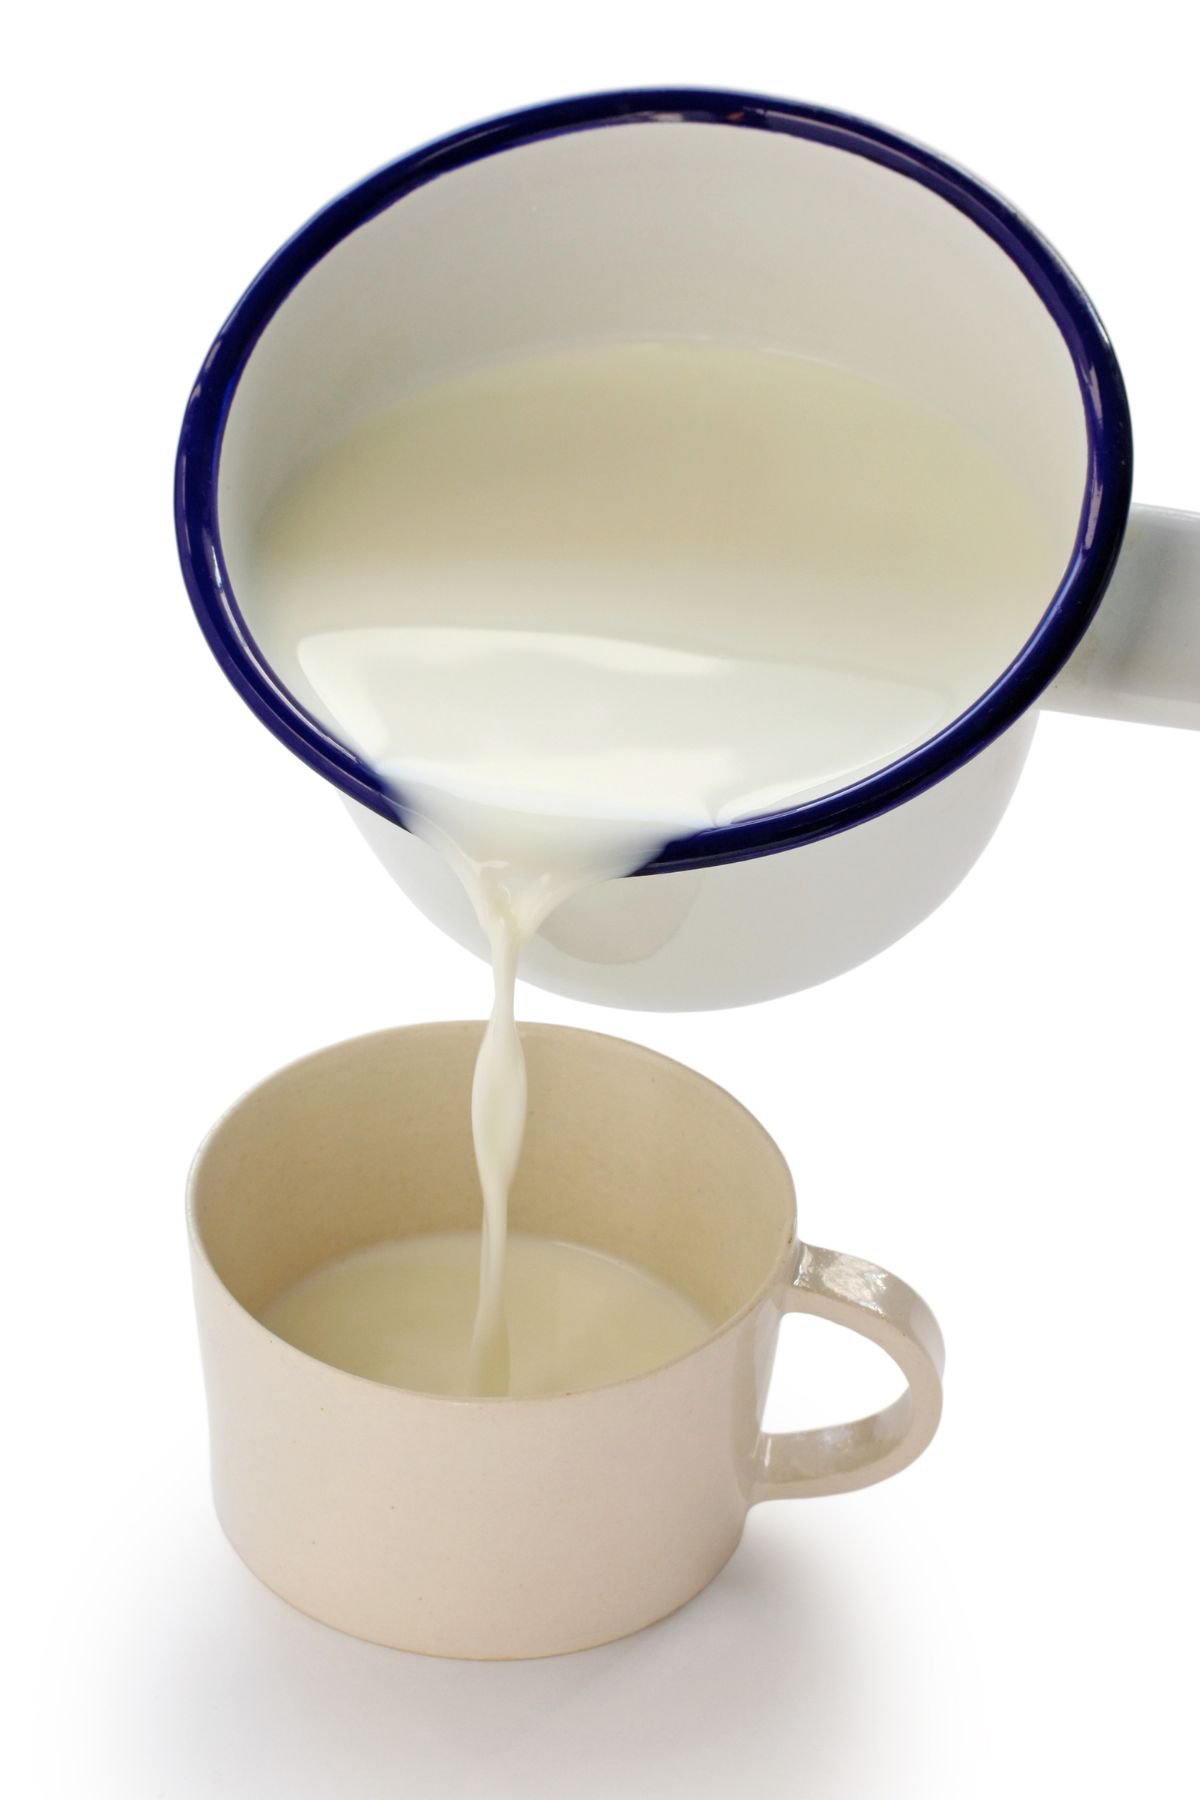 A pan pouring hot milk into a cup.